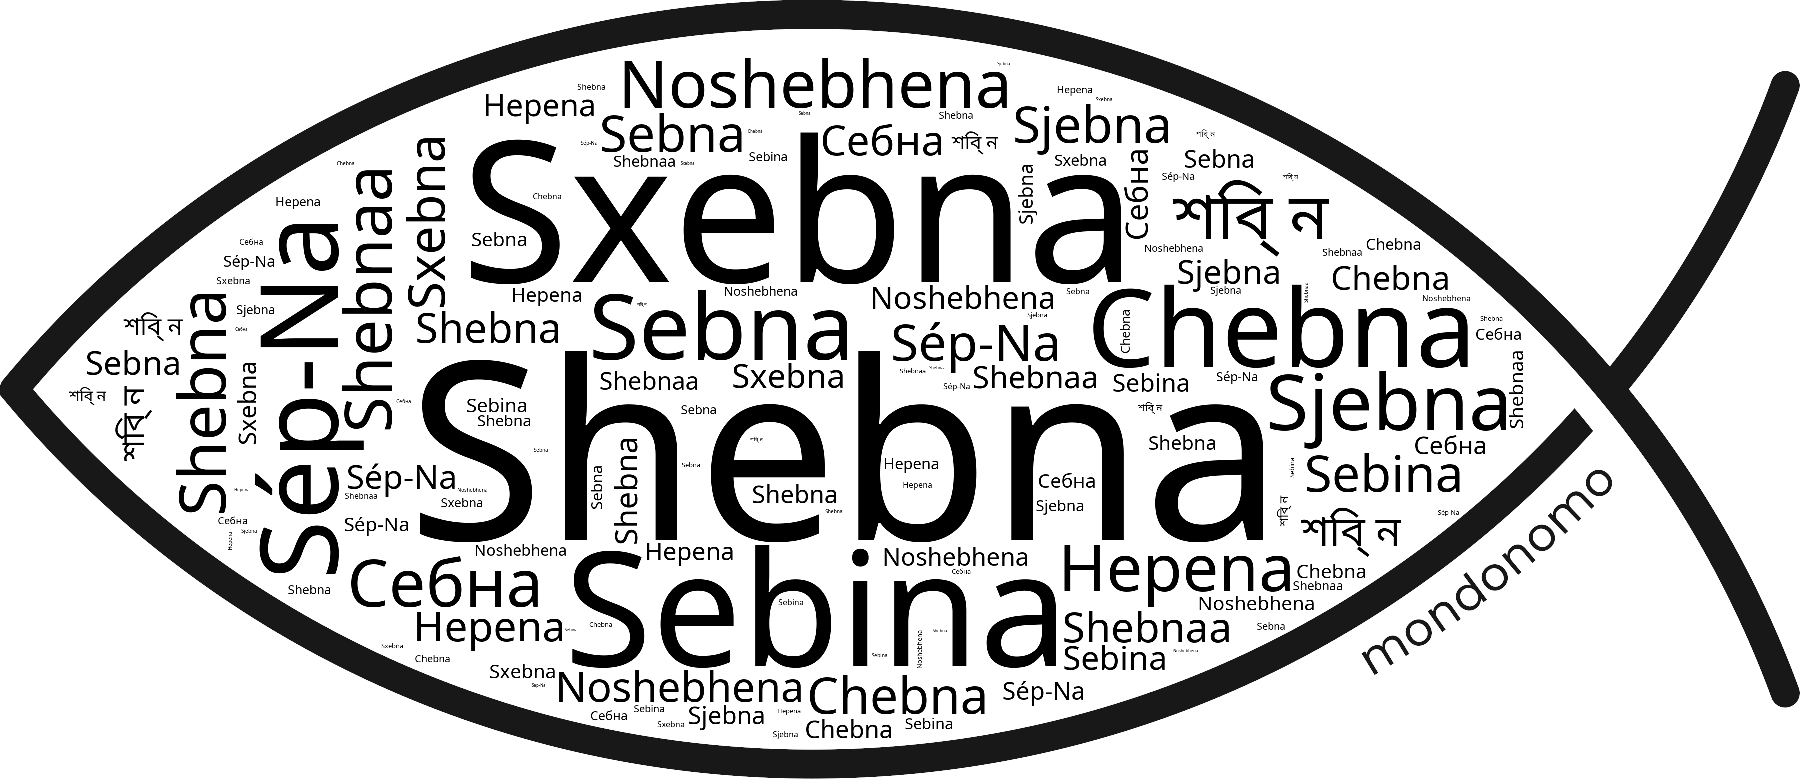 Name Shebna in the world's Bibles